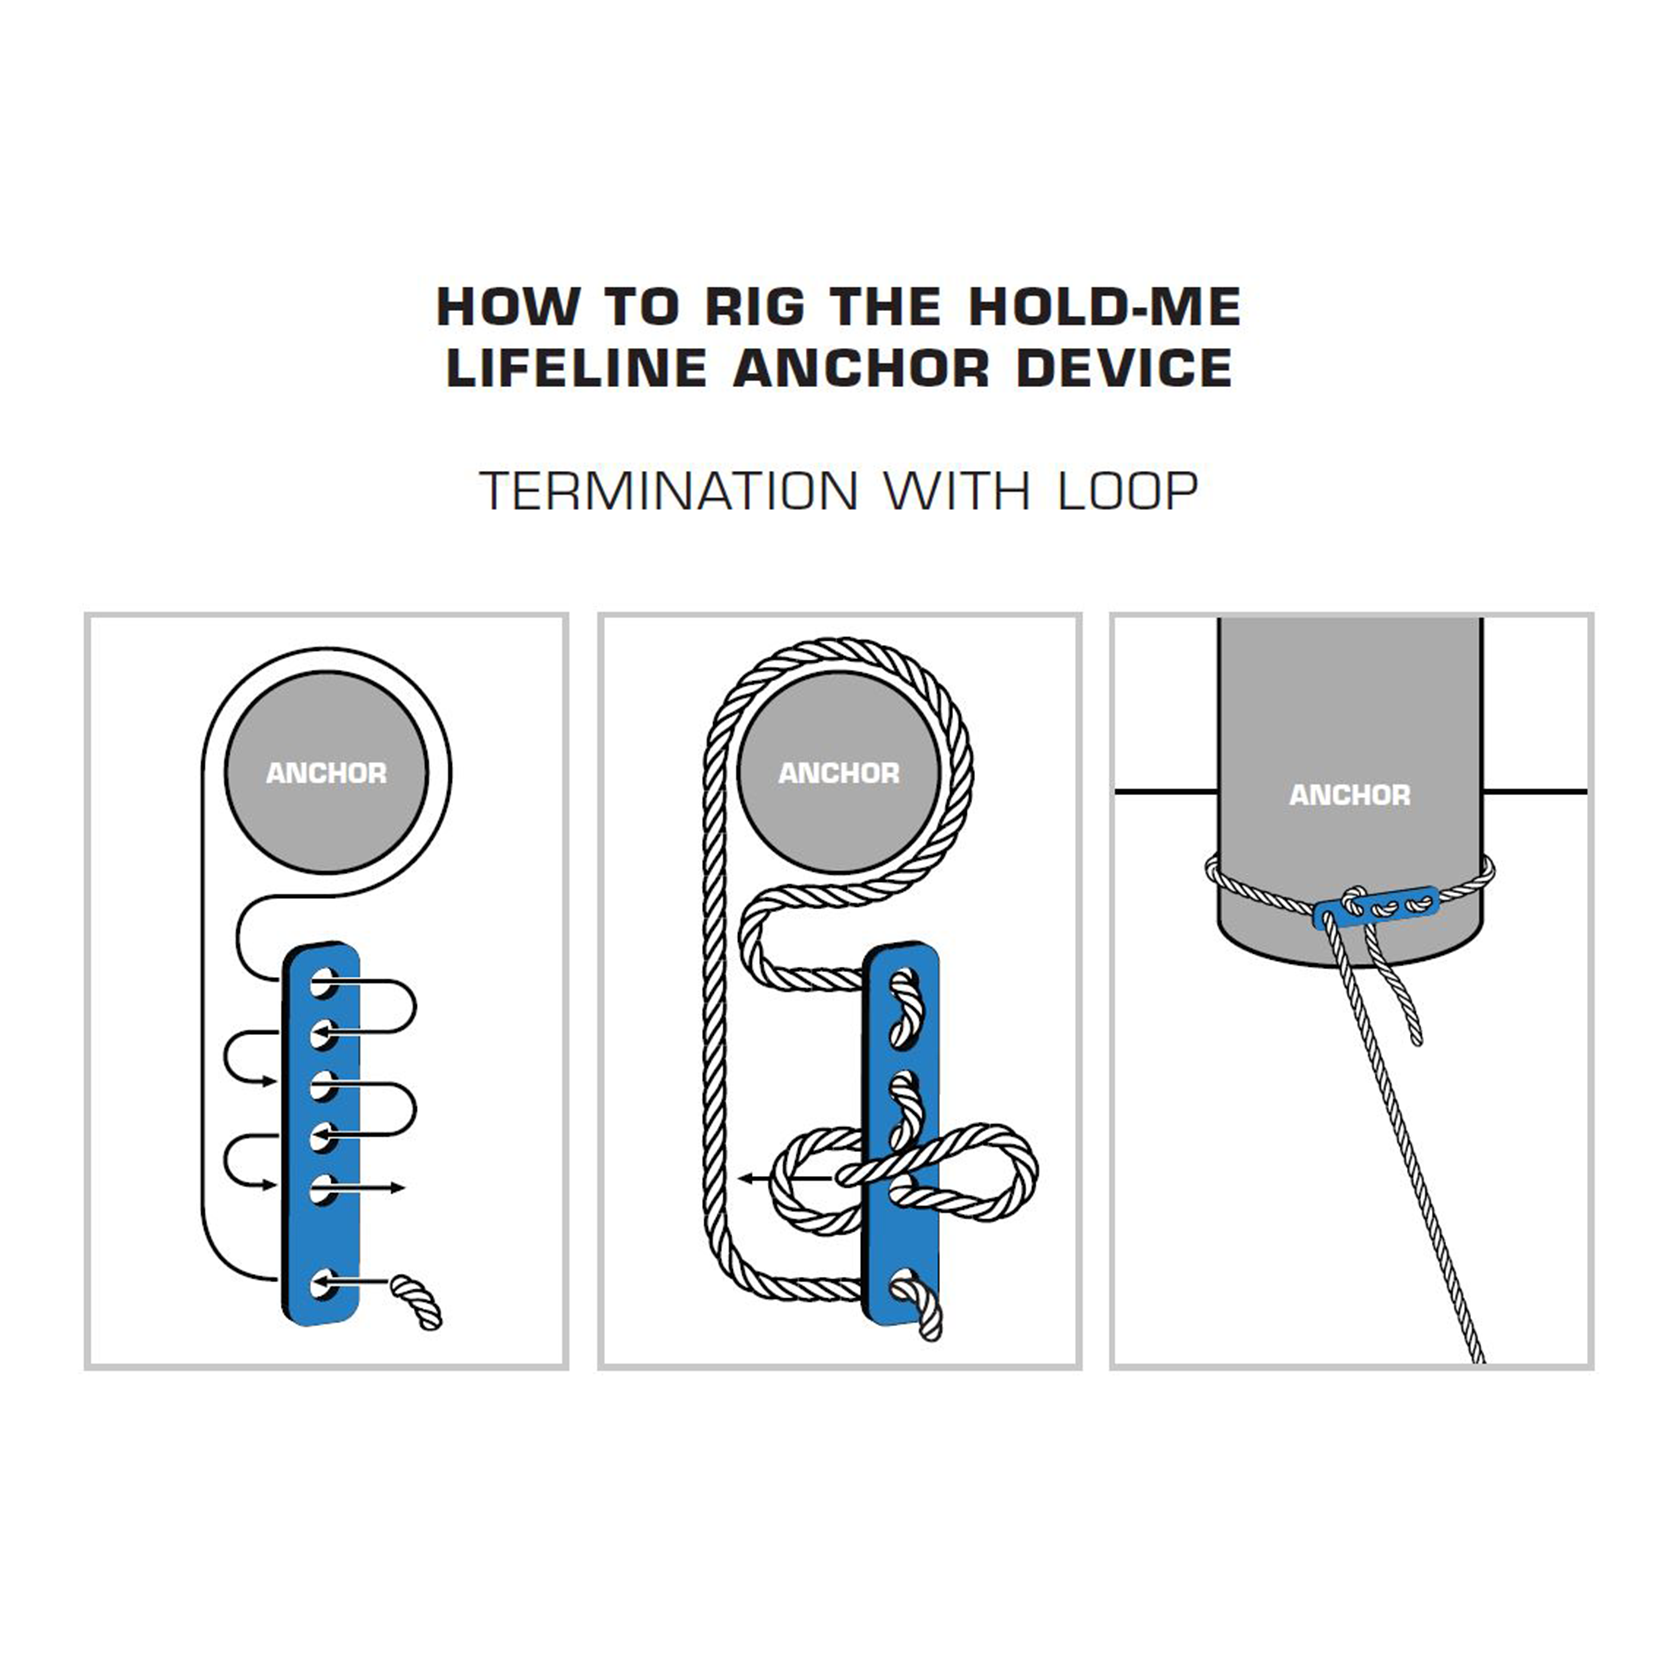 HOLD-ME Lifeline Anchor Instructions